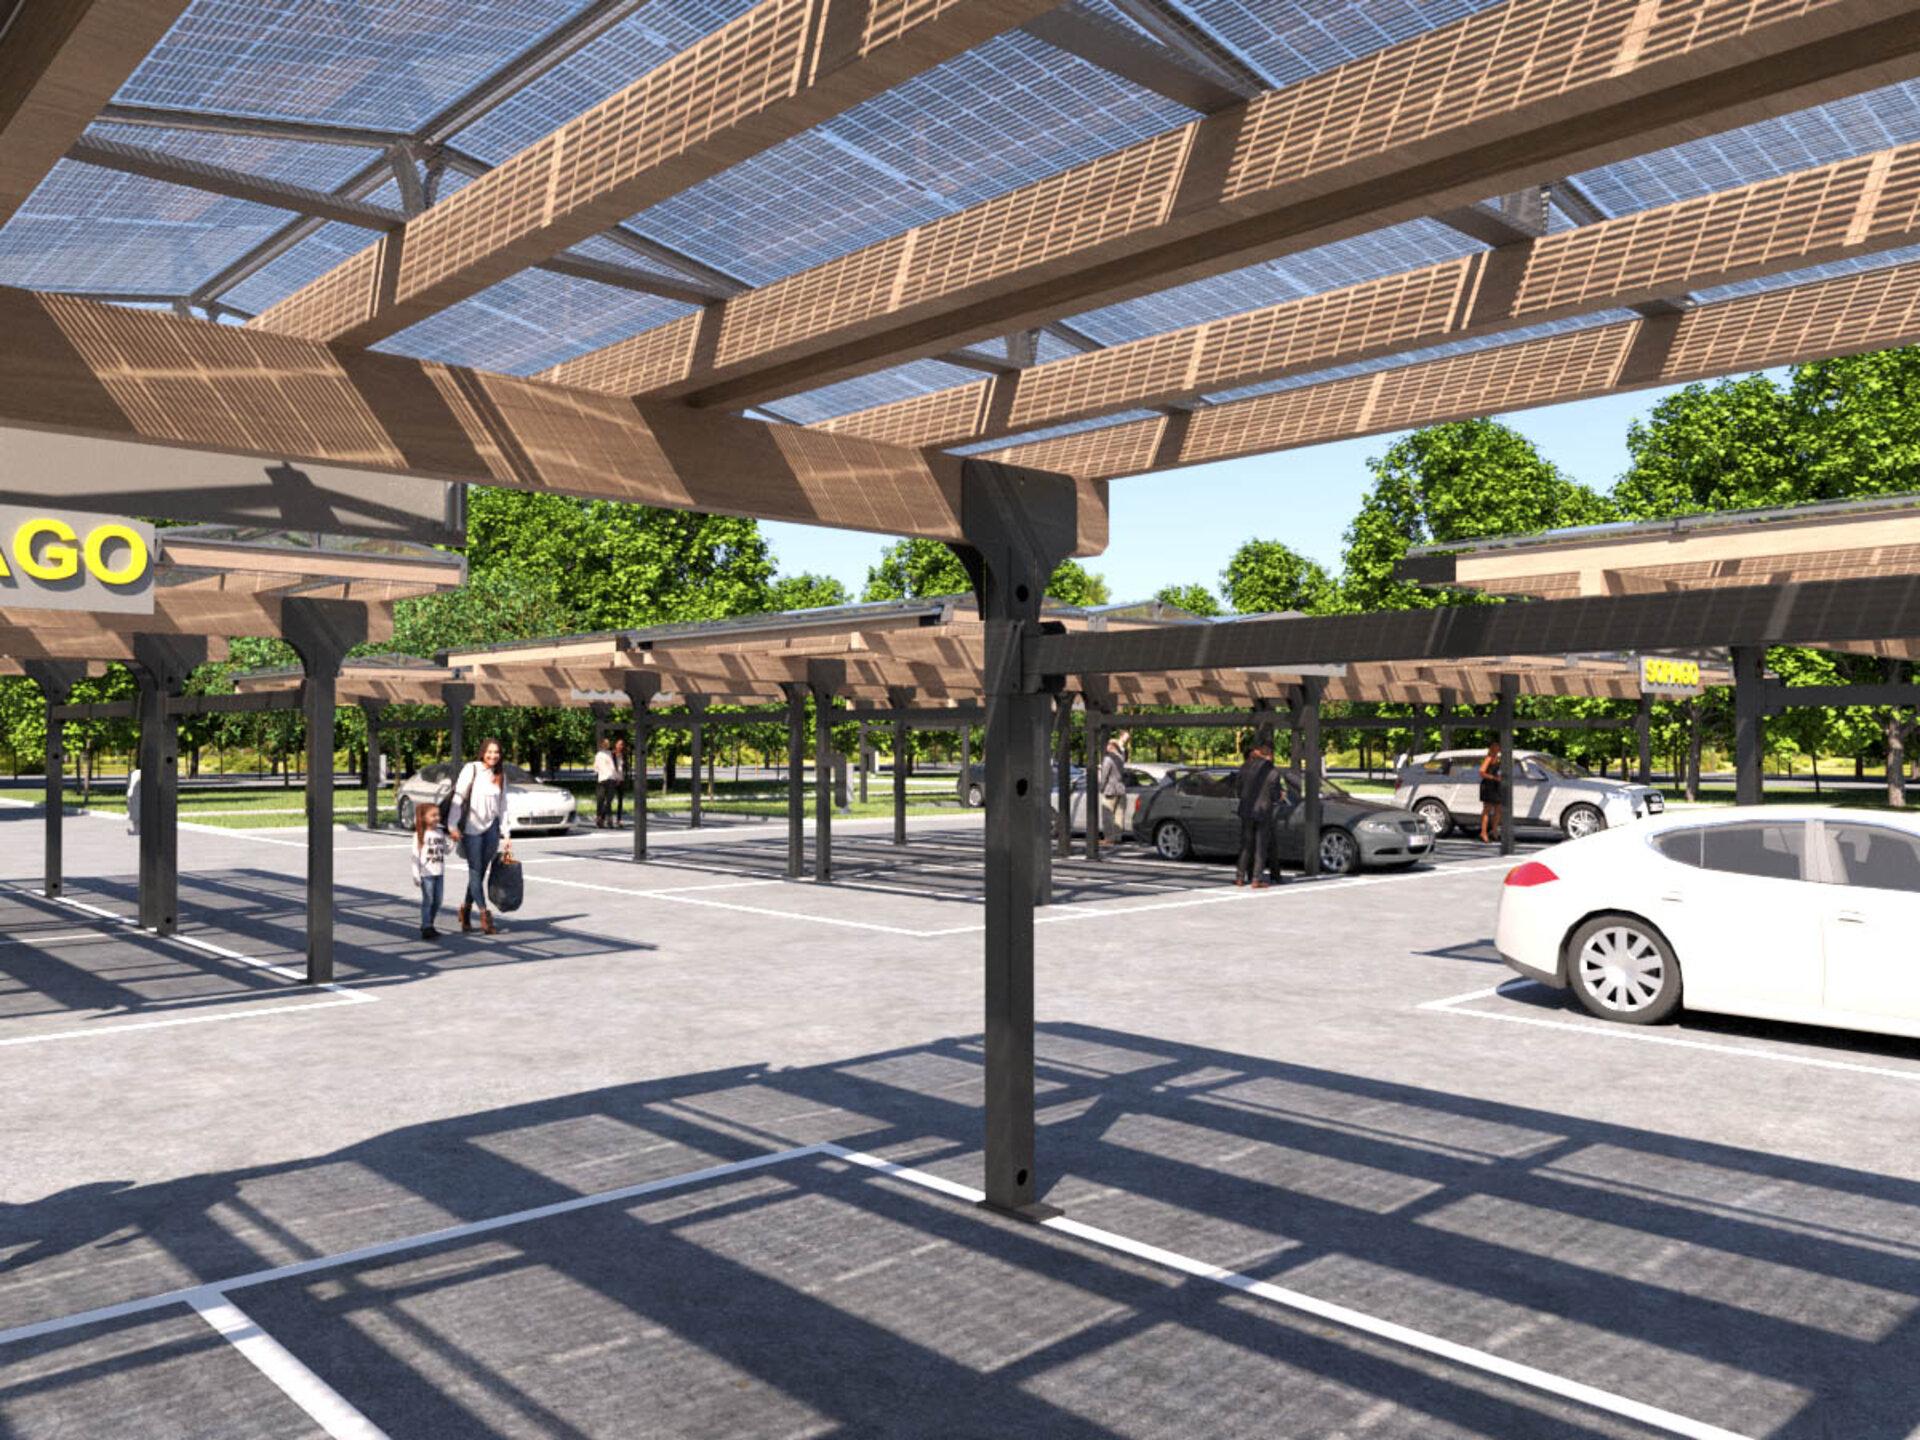 You are currently viewing Clevere Kombination: Carport mit Solar